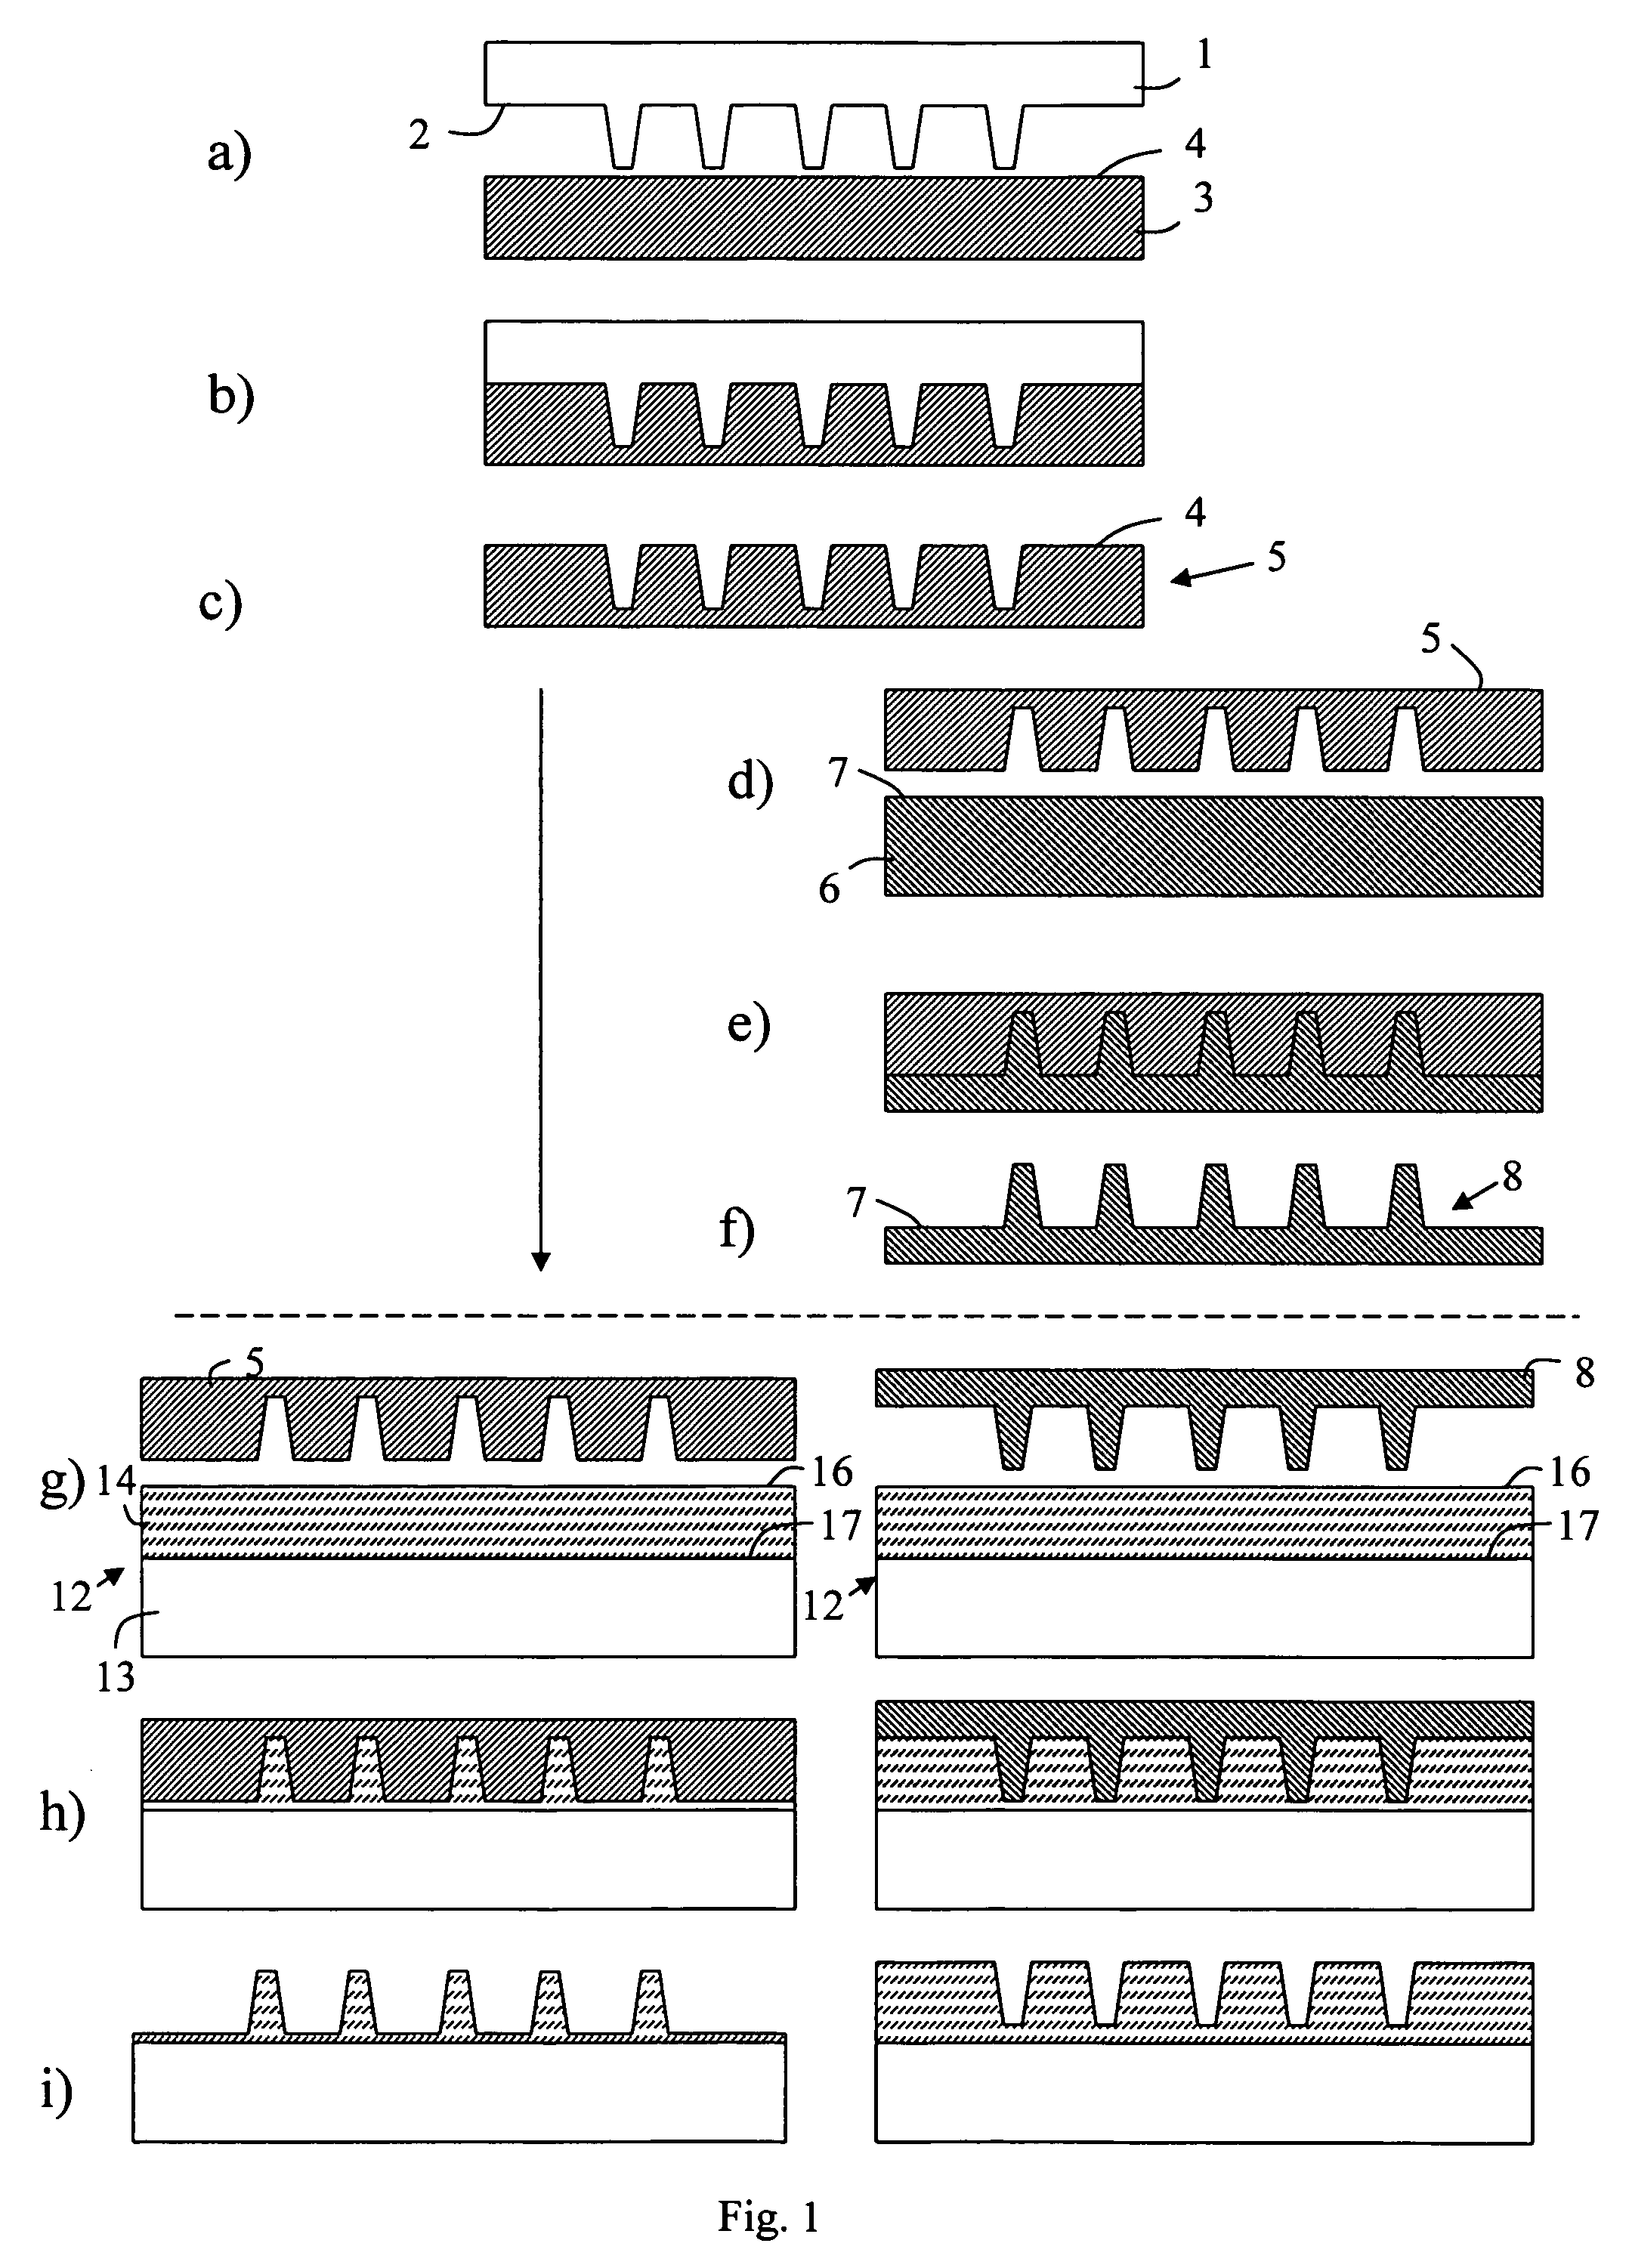 Pattern replication with intermediate stamp